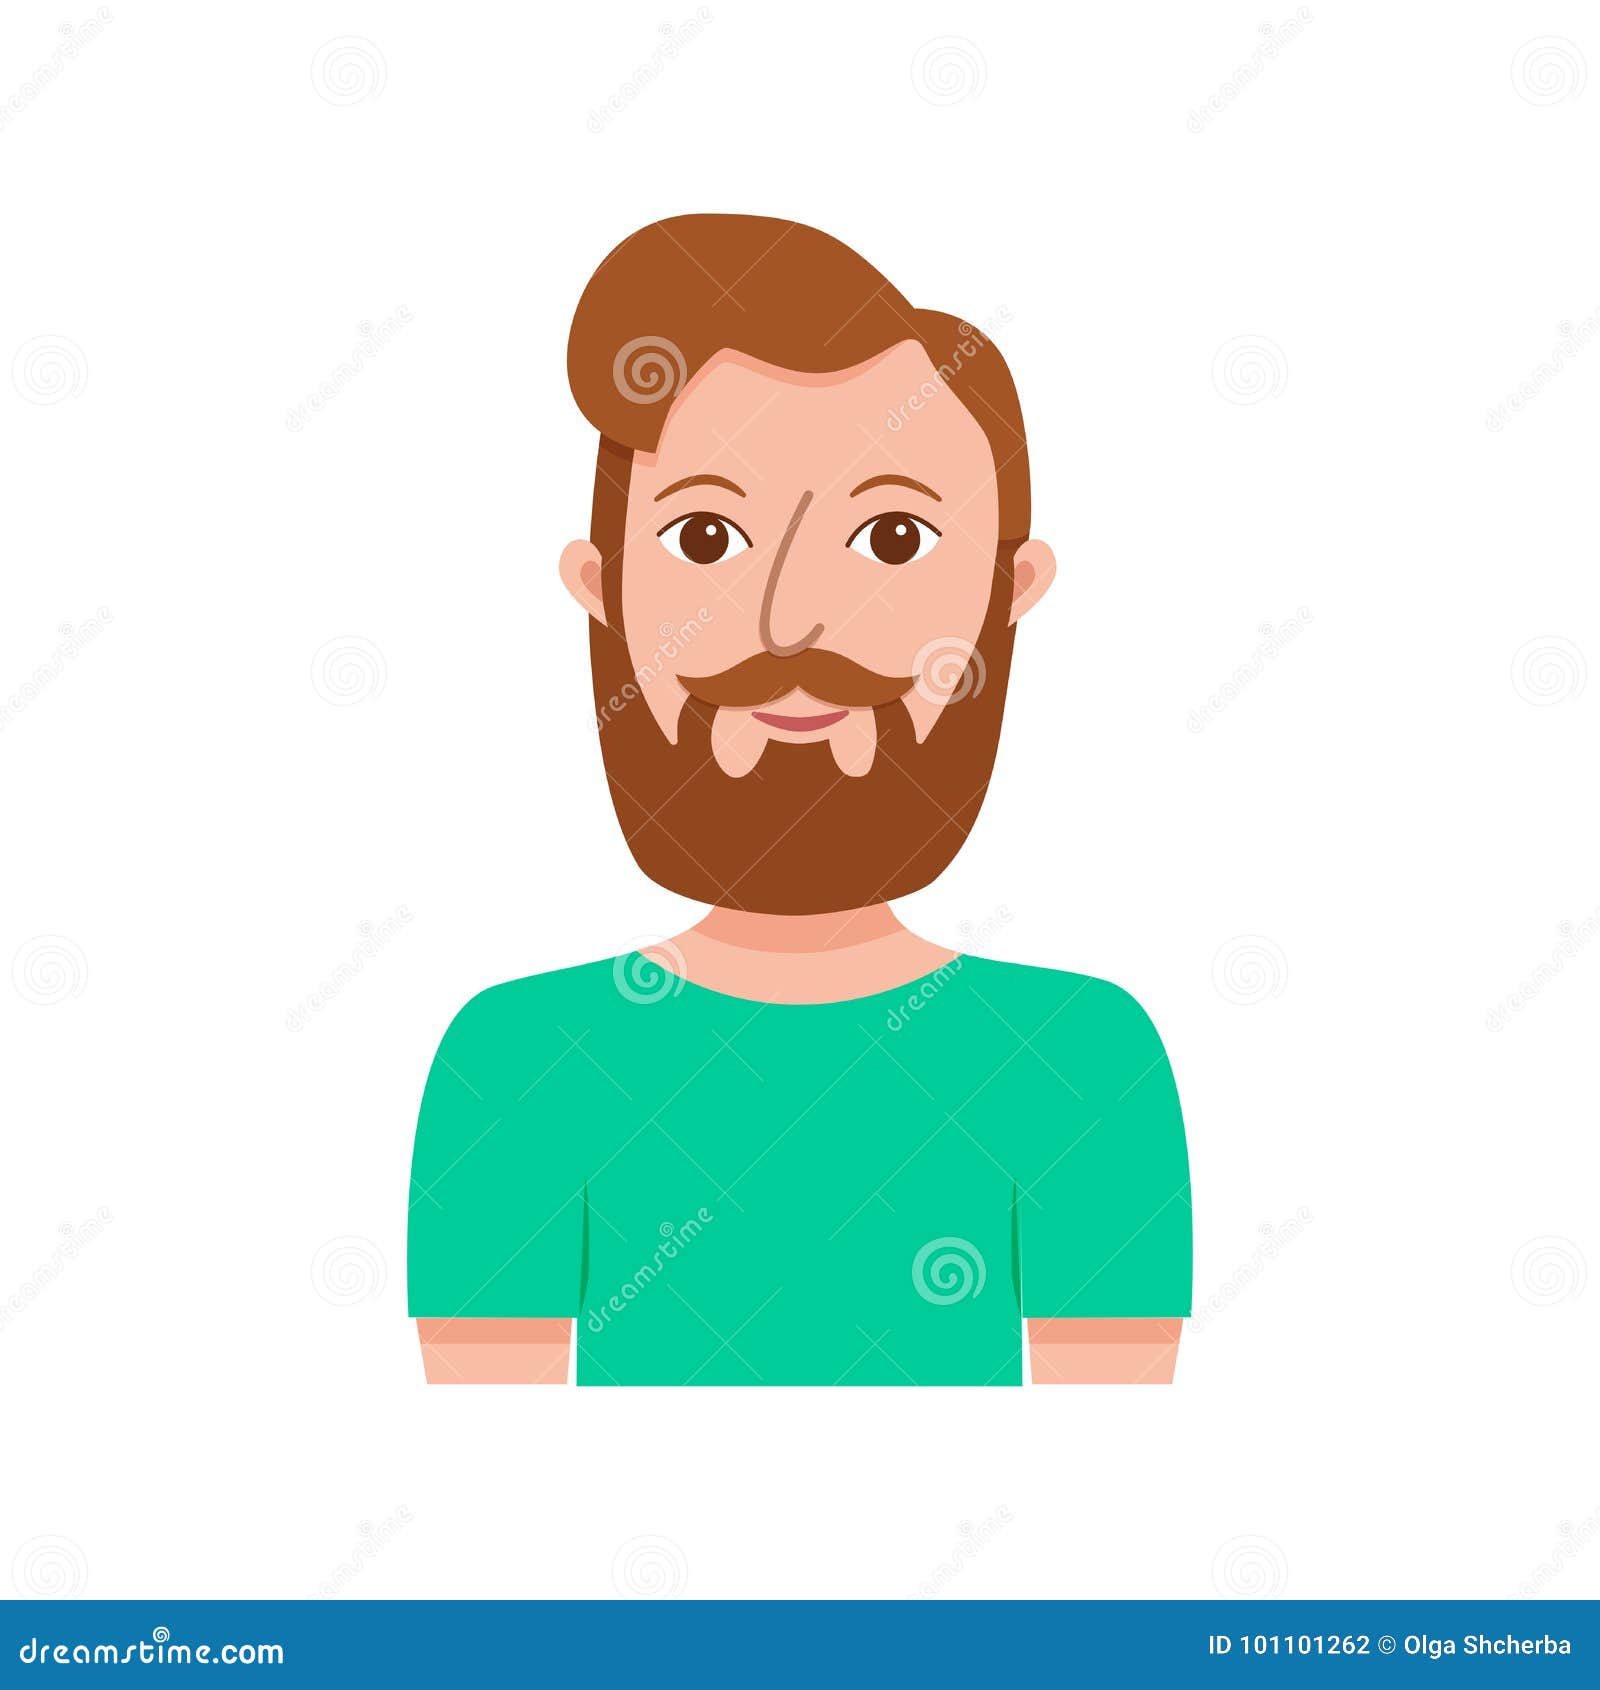 Male Hipster Cartoon Character Stock Vector - Illustration of beard,  character: 101101262